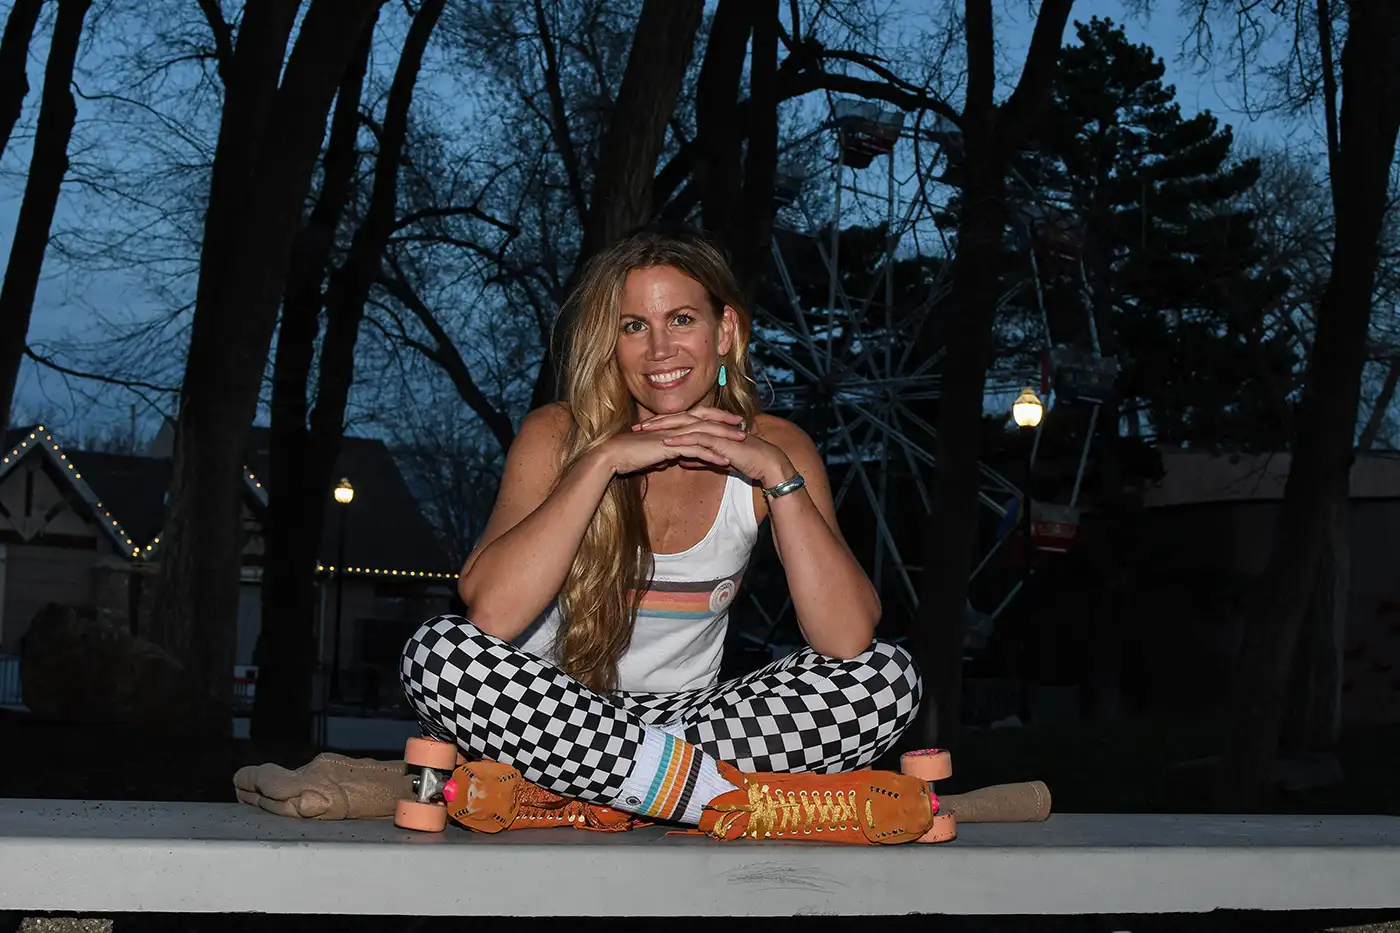 Elise Jones sits on a park bench lit by a camera flash. She is dressed in sporty, vintage clothing. Photo: Jovvany Villalobos